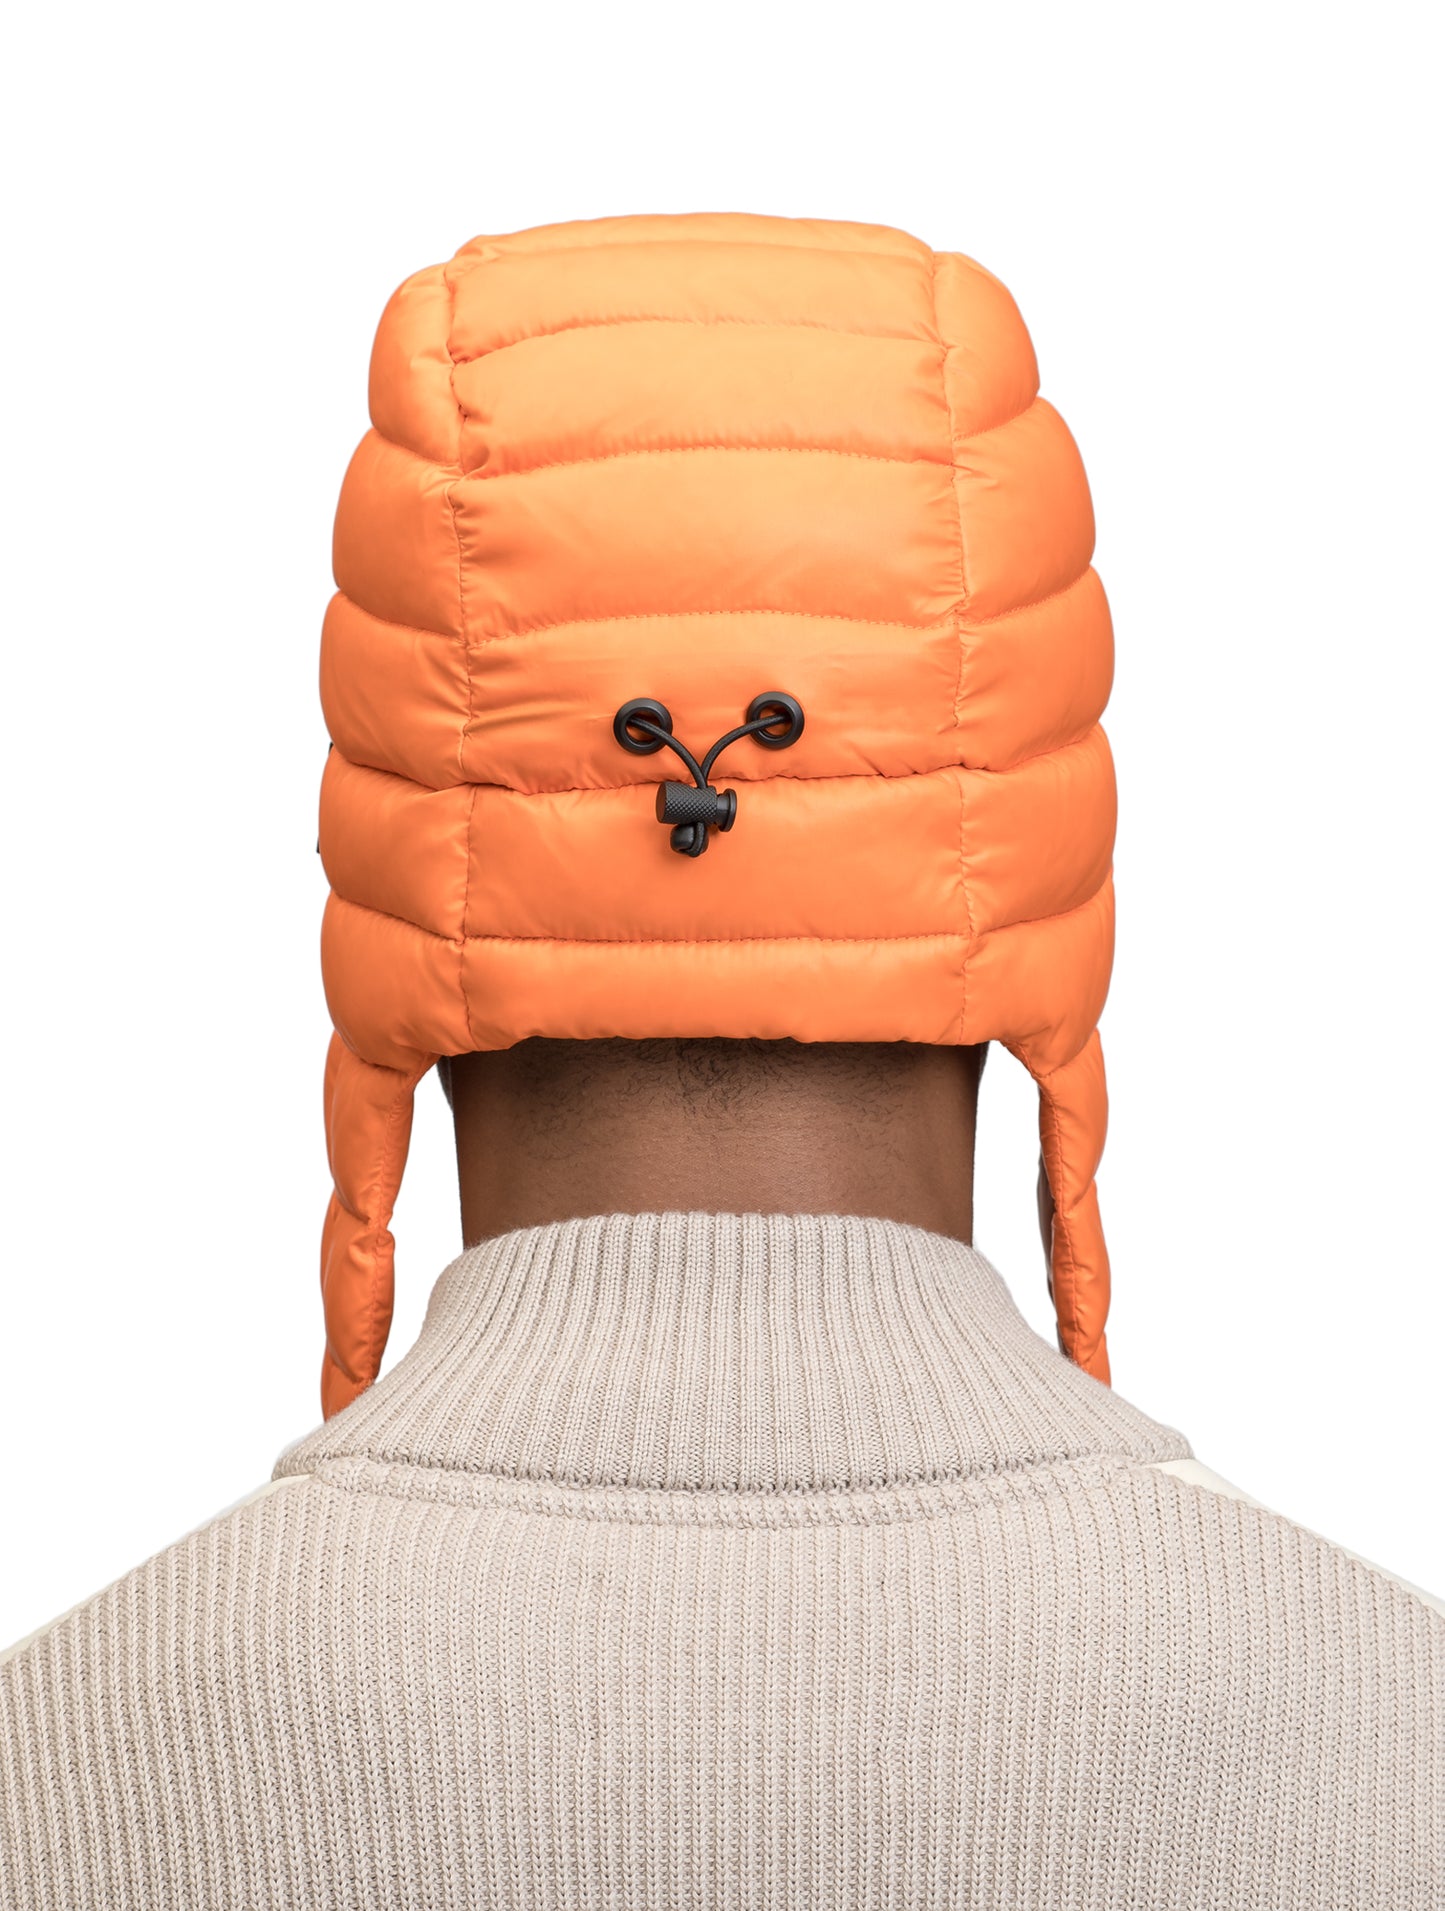 Unisex down-filled quilted fargo hat with adjustable chin strap in Atomic